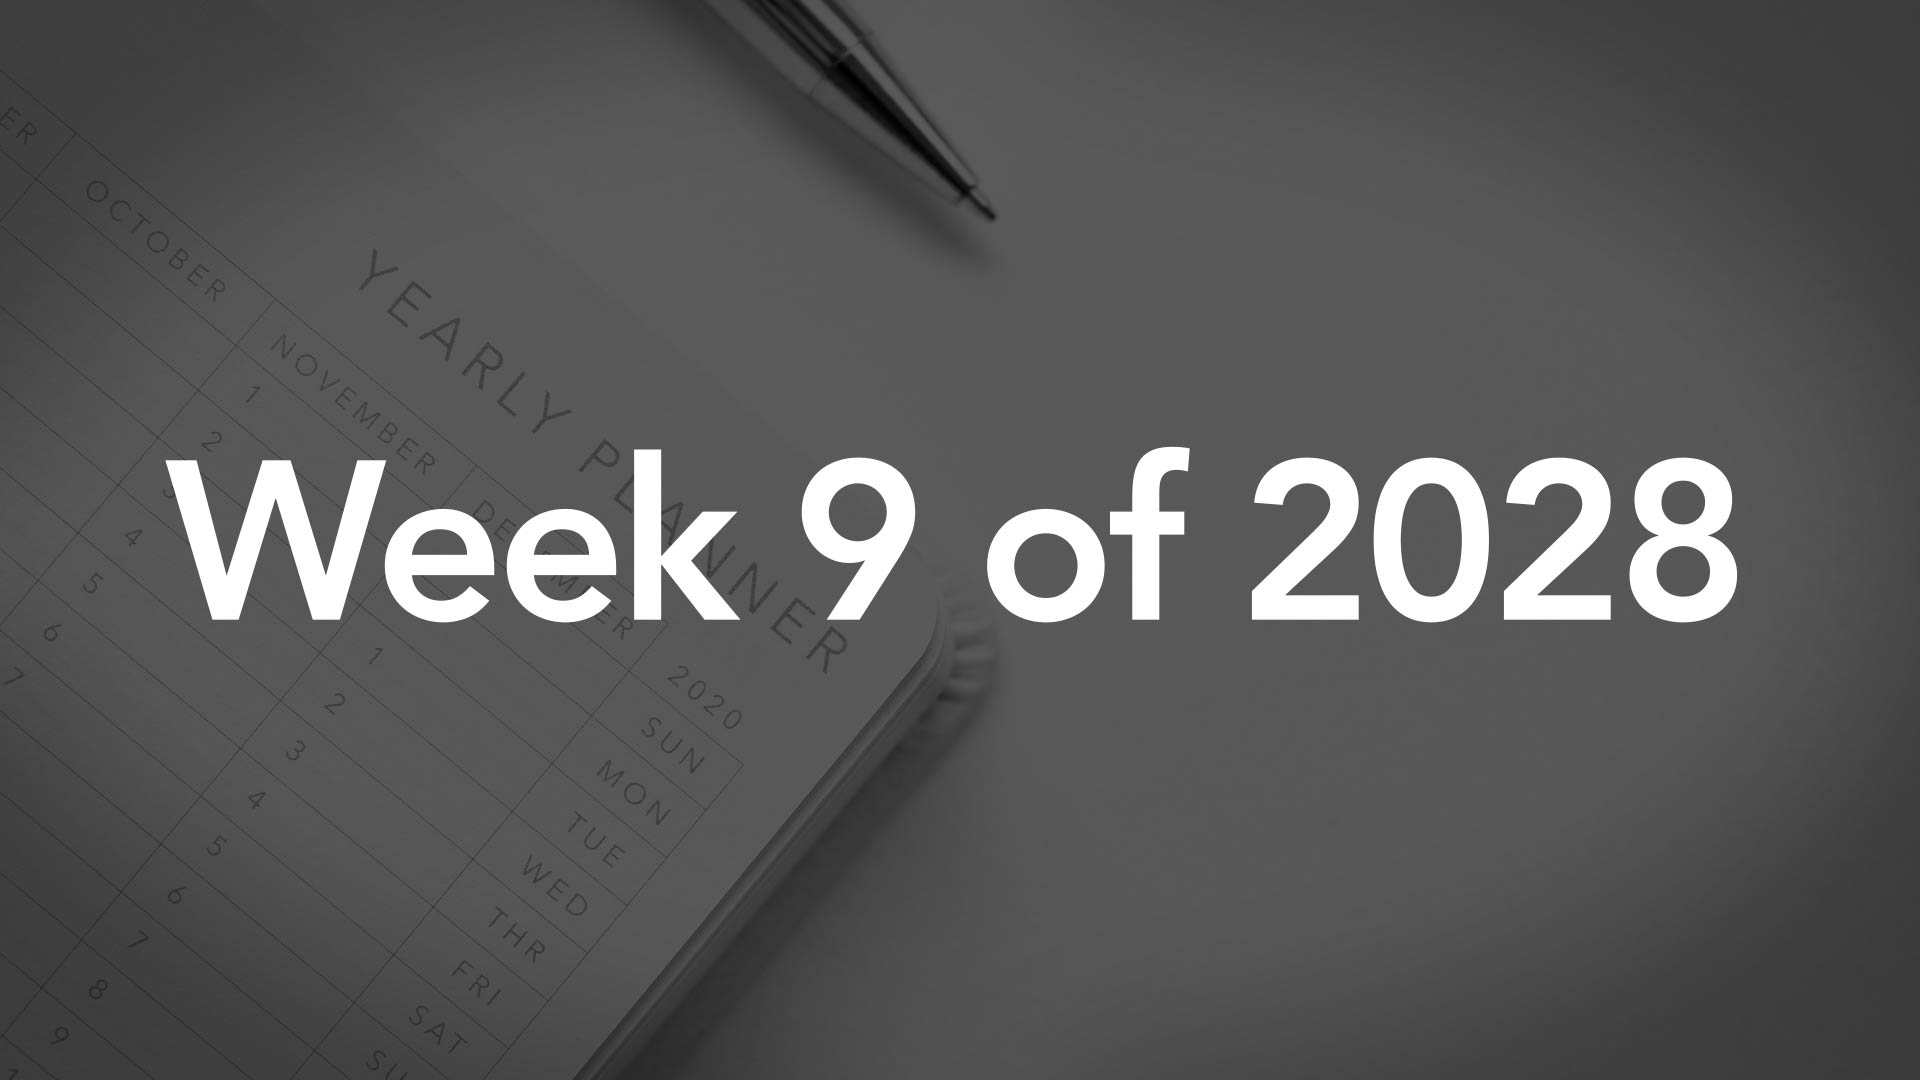 Title Image for Week 9 of 2028